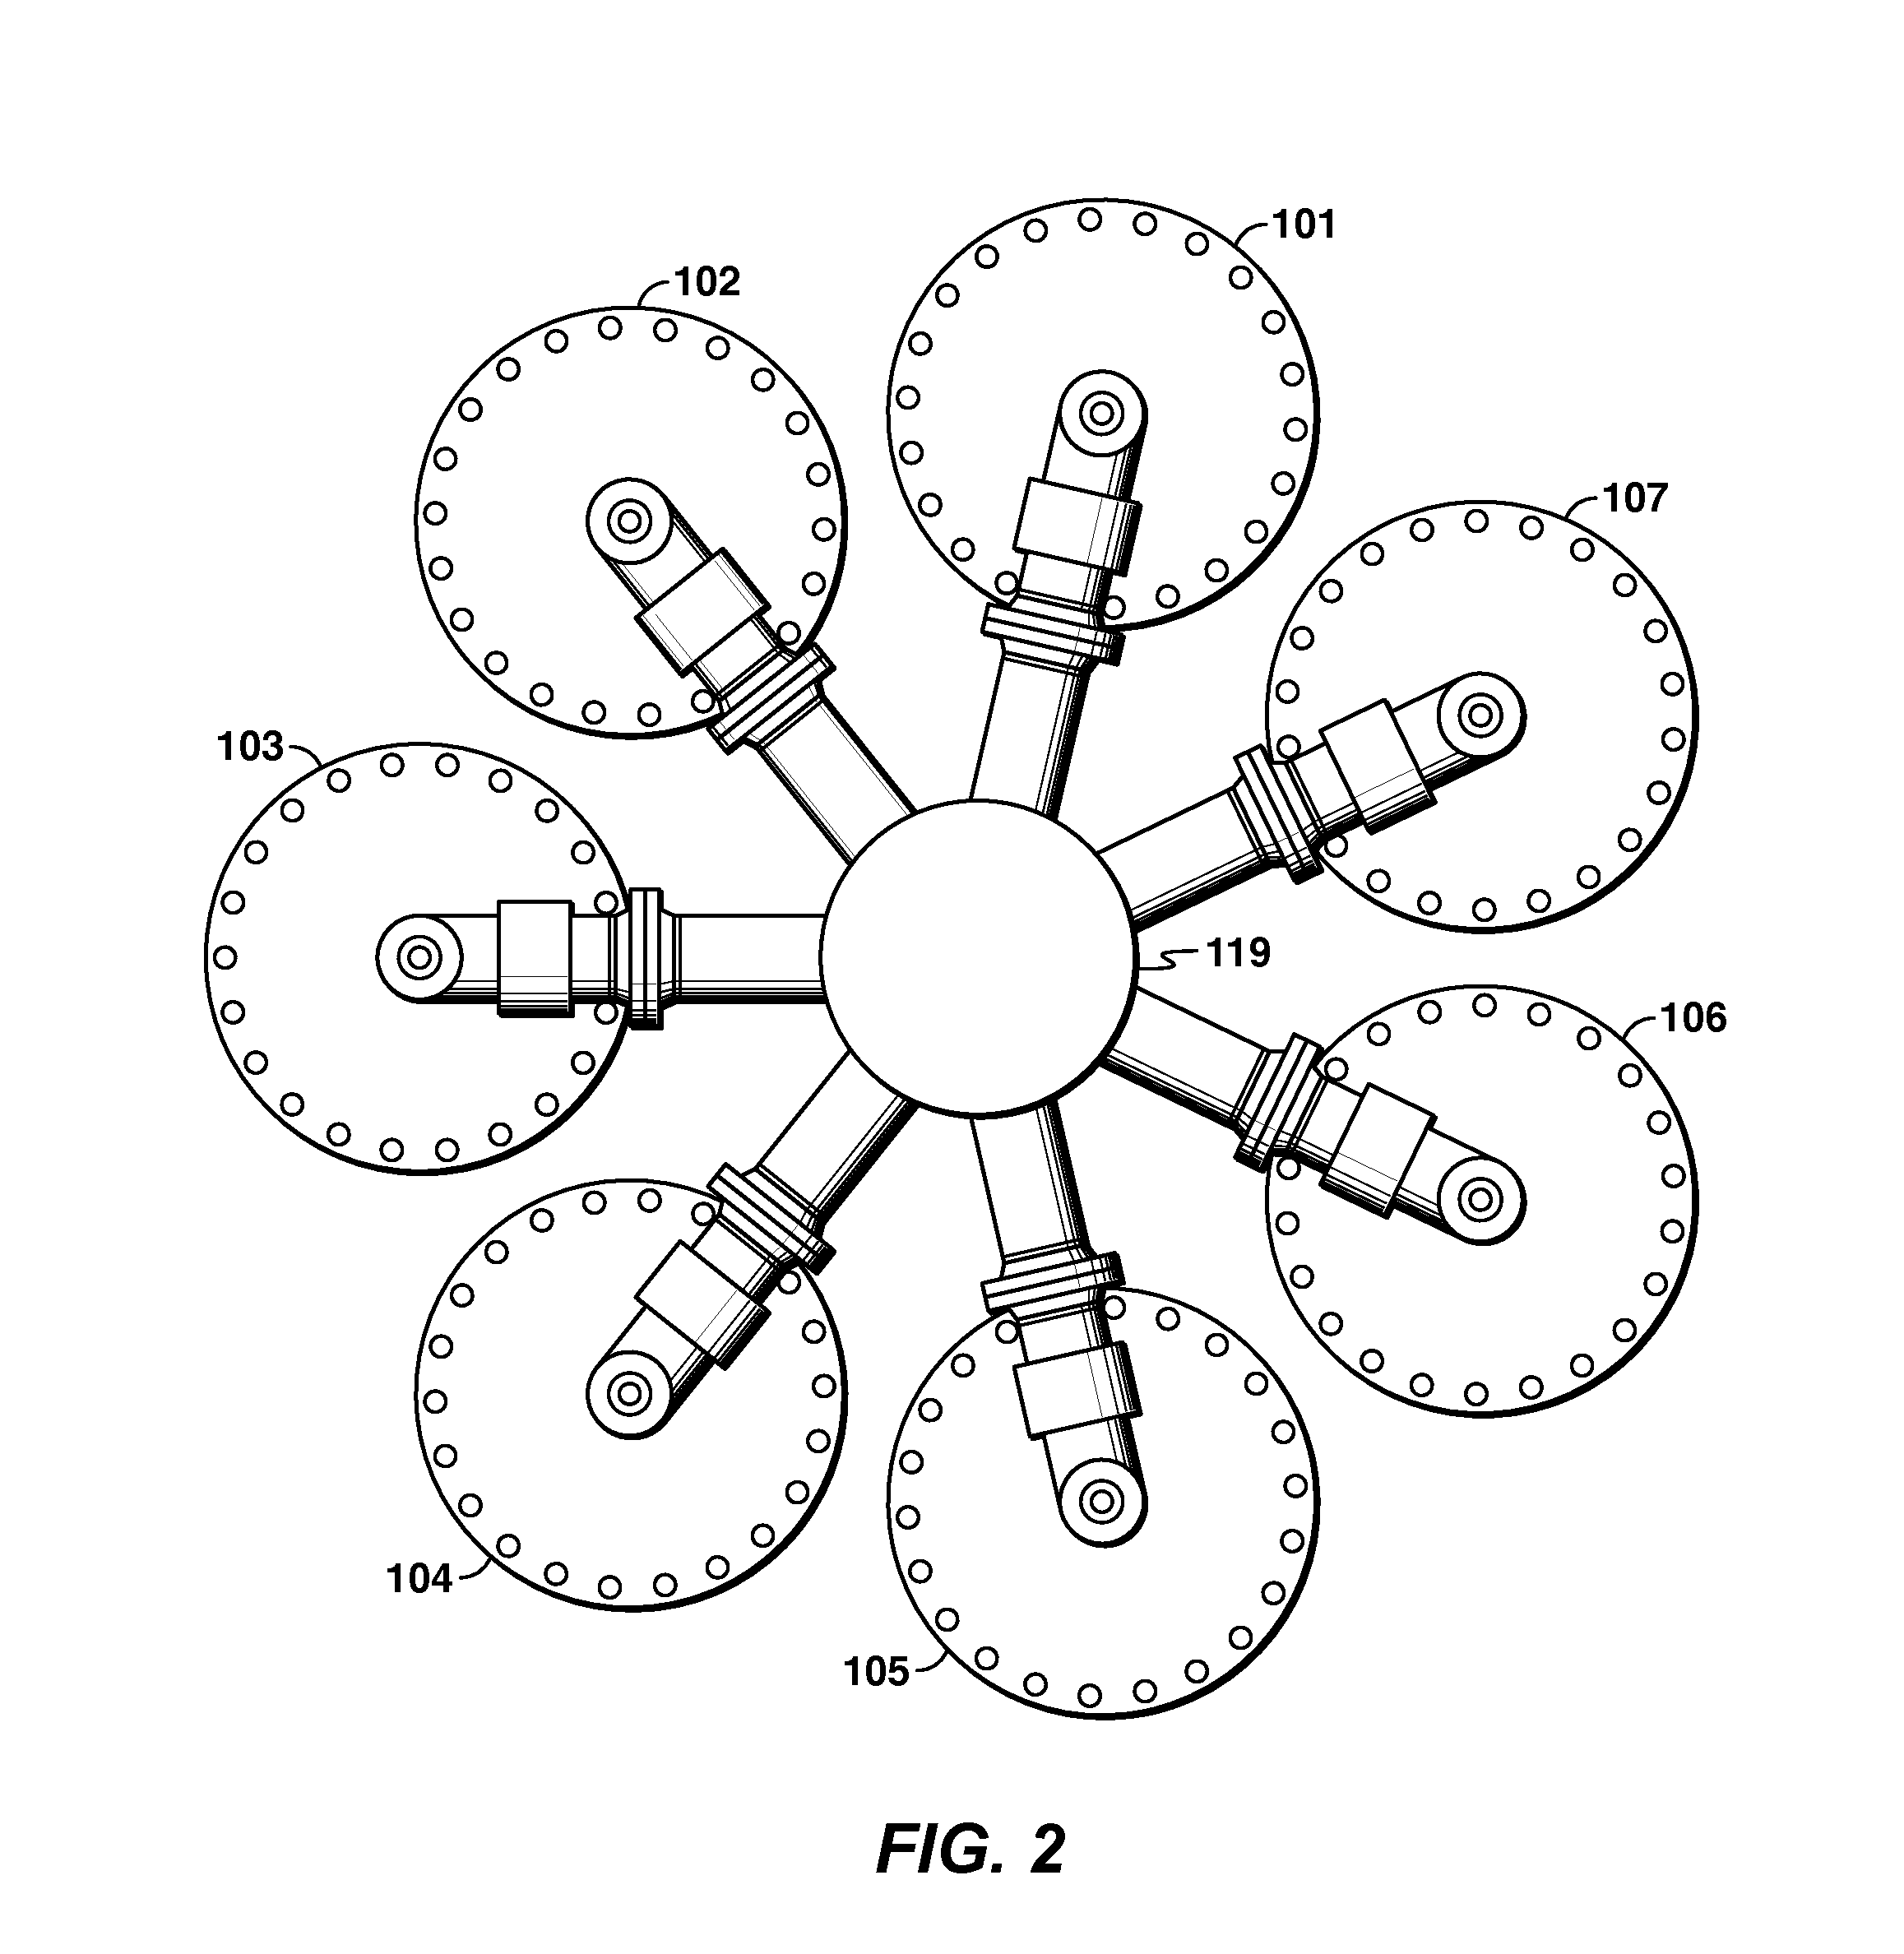 Apparatus and Systems Having a Rotary Valve Assembly and Swing Adsorption Processes Related Thereto